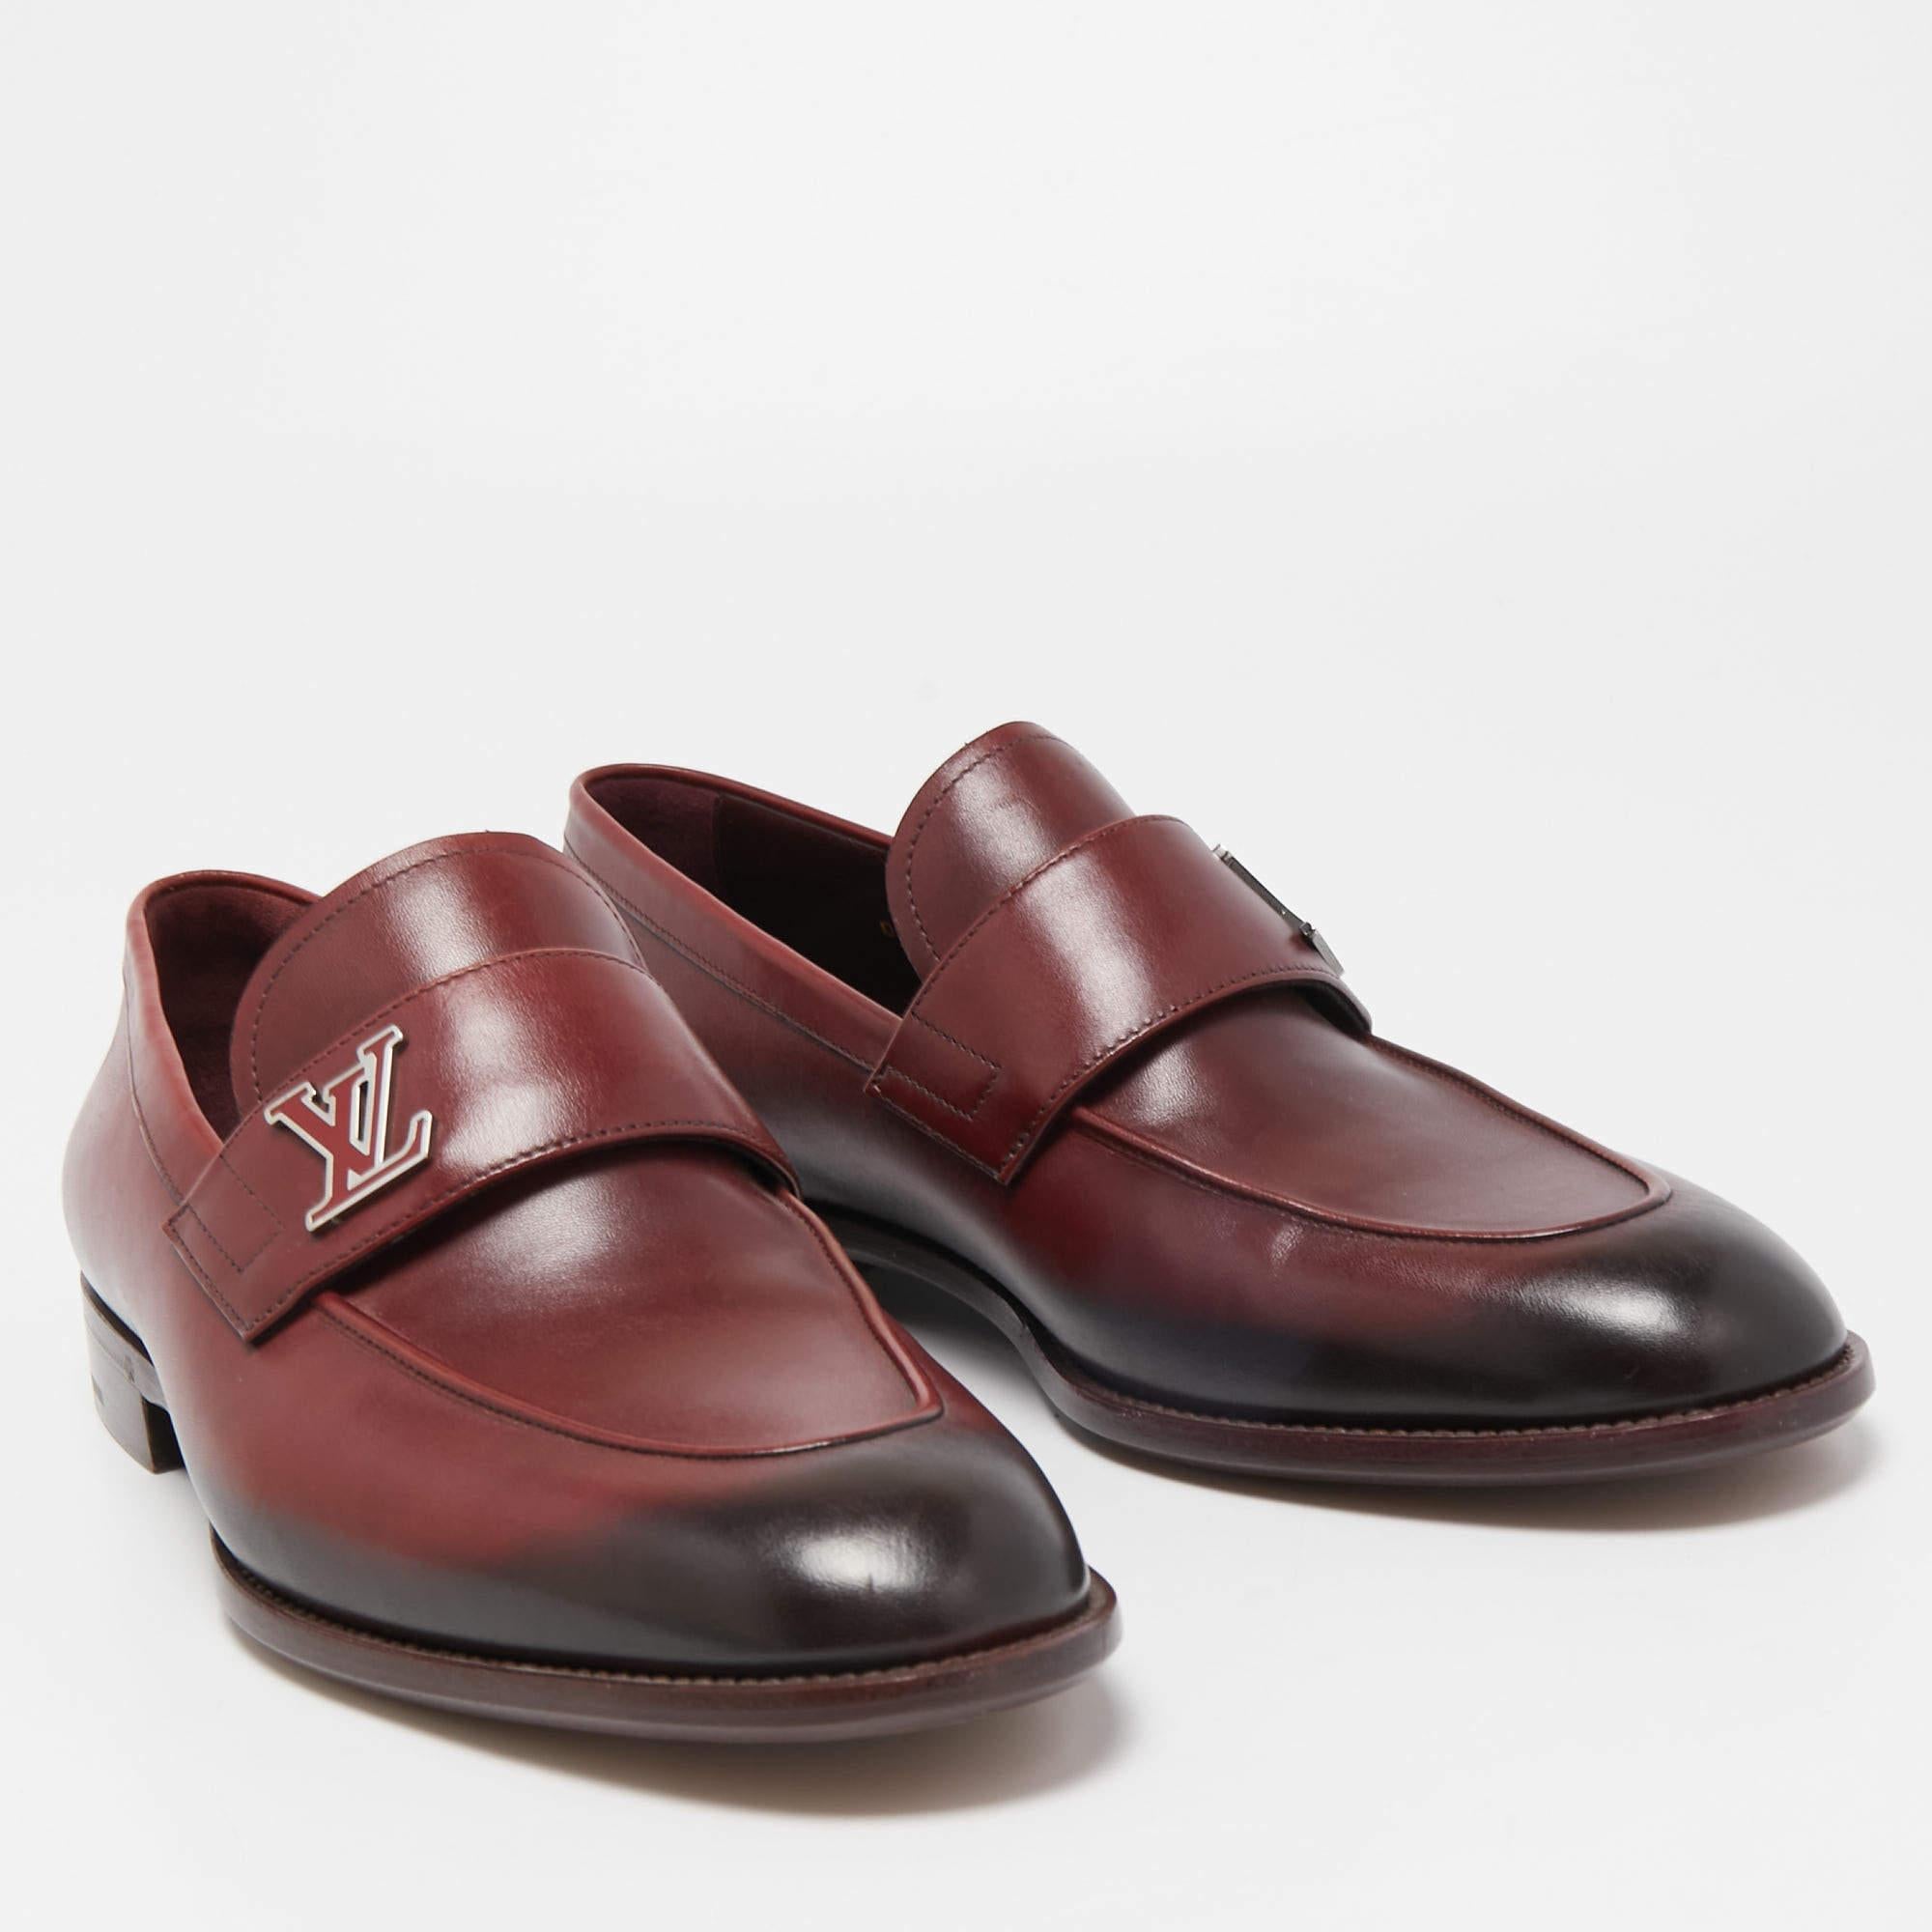 Louise Vuitton Burgundy/Black Leather Slip On Loafers Size 41 In New Condition In Dubai, Al Qouz 2